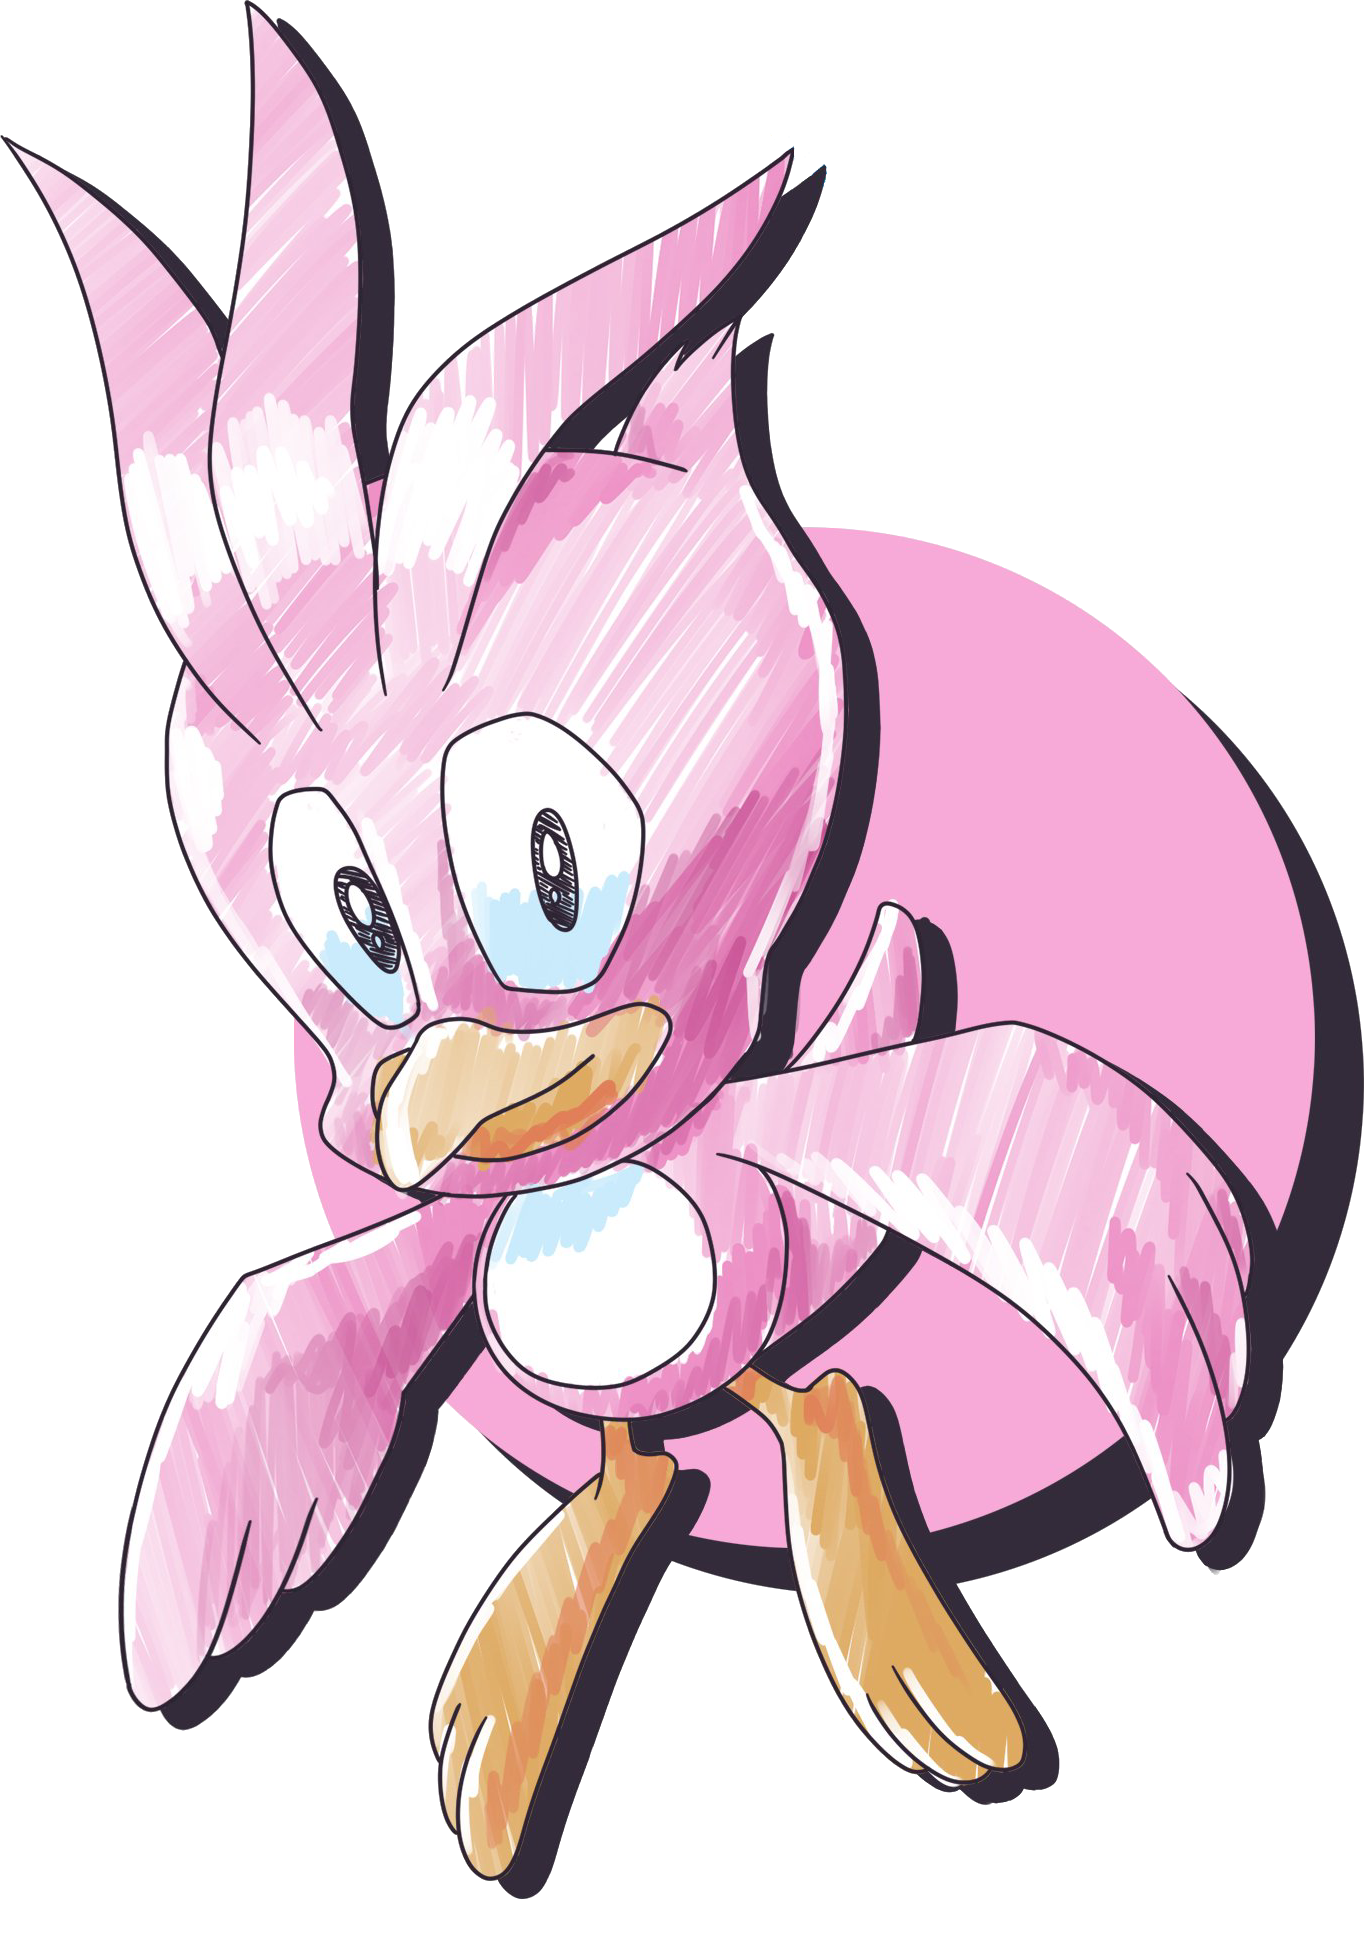 Ko the Flicky, Sonic: What If? Wiki